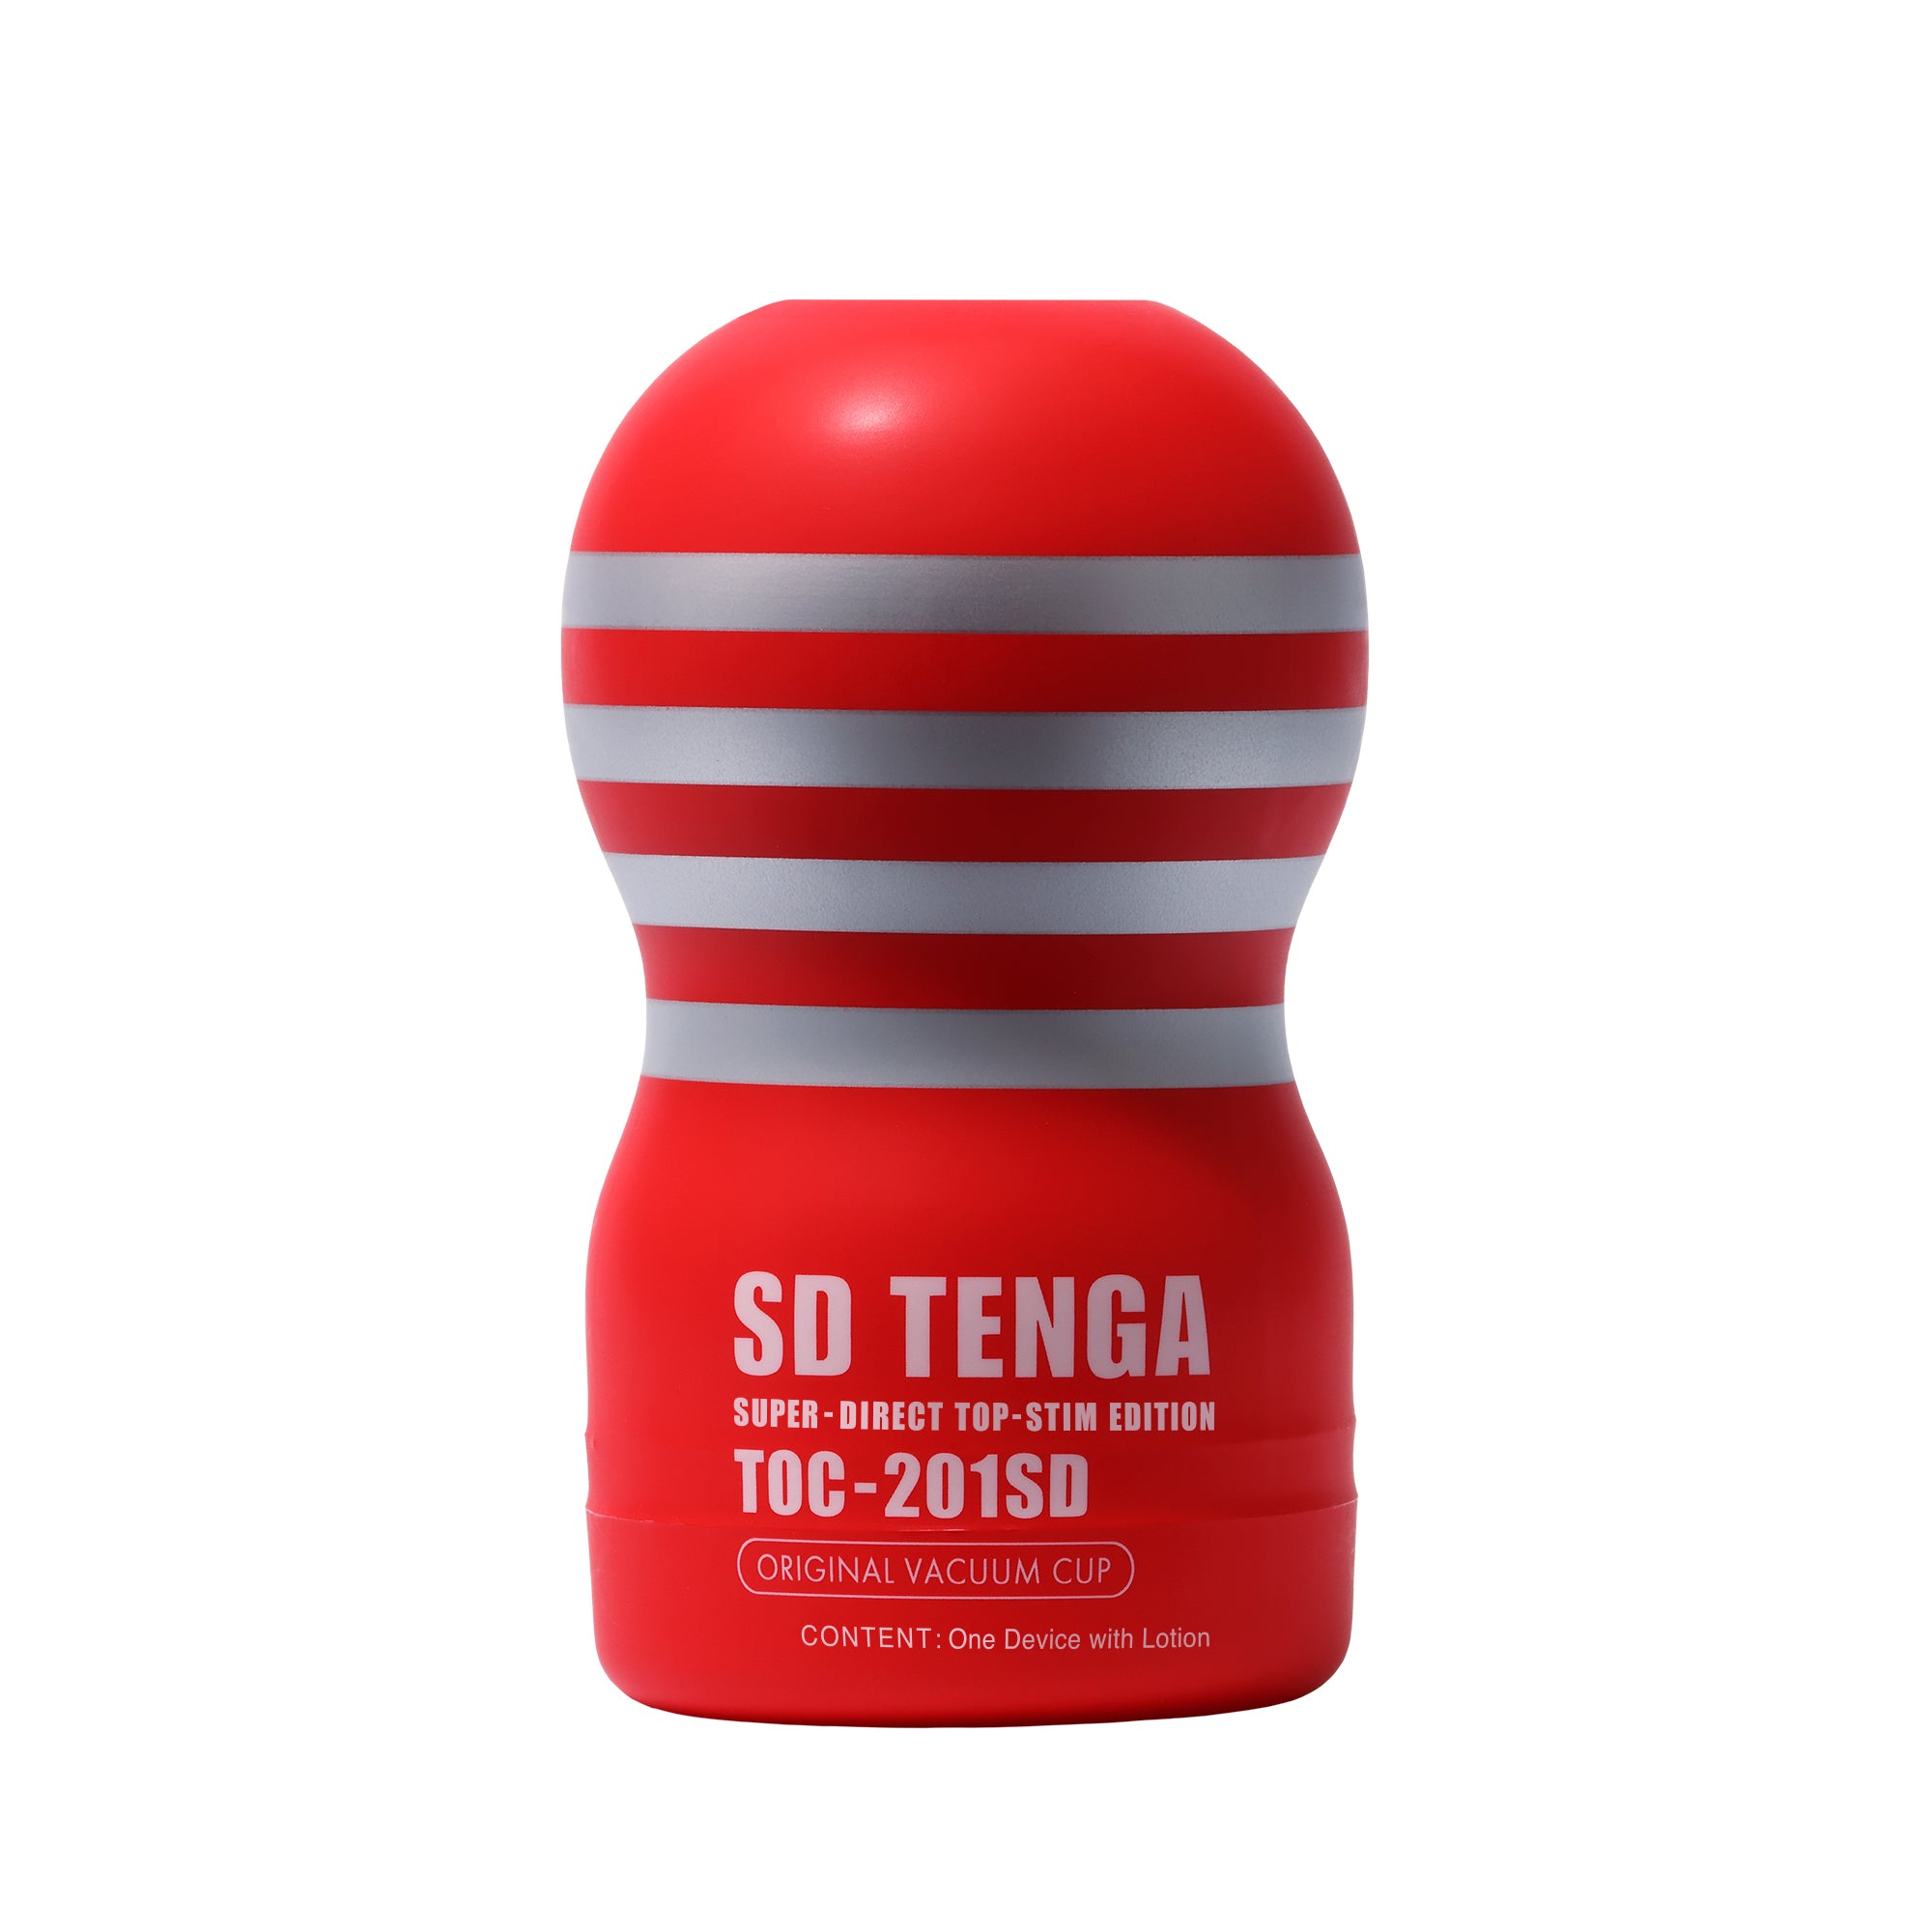 SD TENGA; The small vacuum cup - review - Naughty Business Report